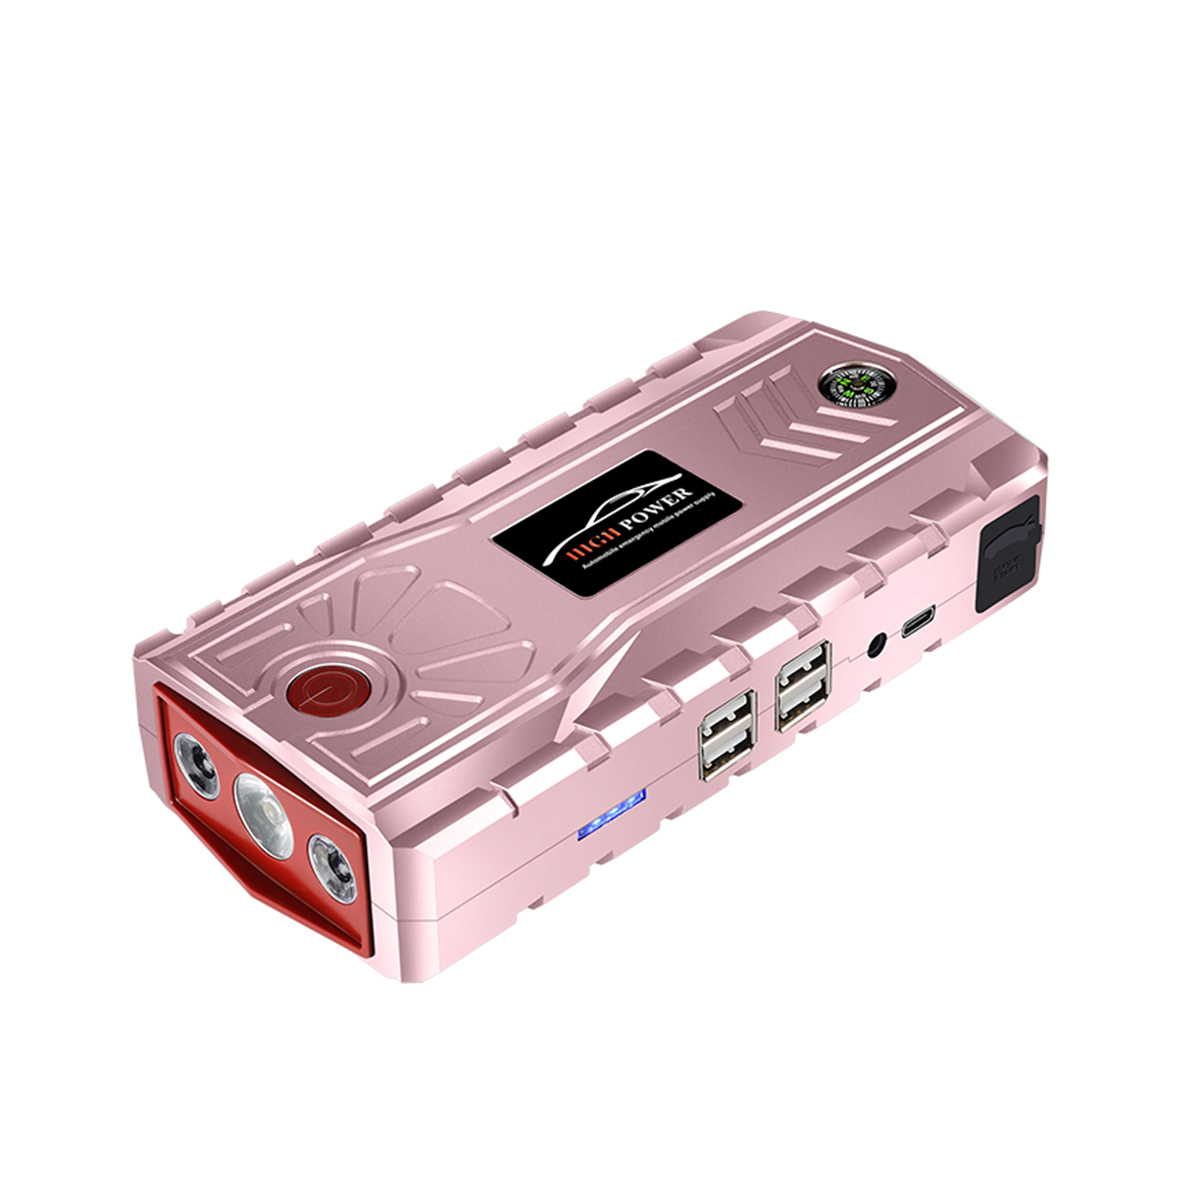 

Portable Car Jump Starter 15000mAh 800A Peak Powerbank Emergency Battery Booster Digital Charger with LED Flashlight USB Port Rose Pink